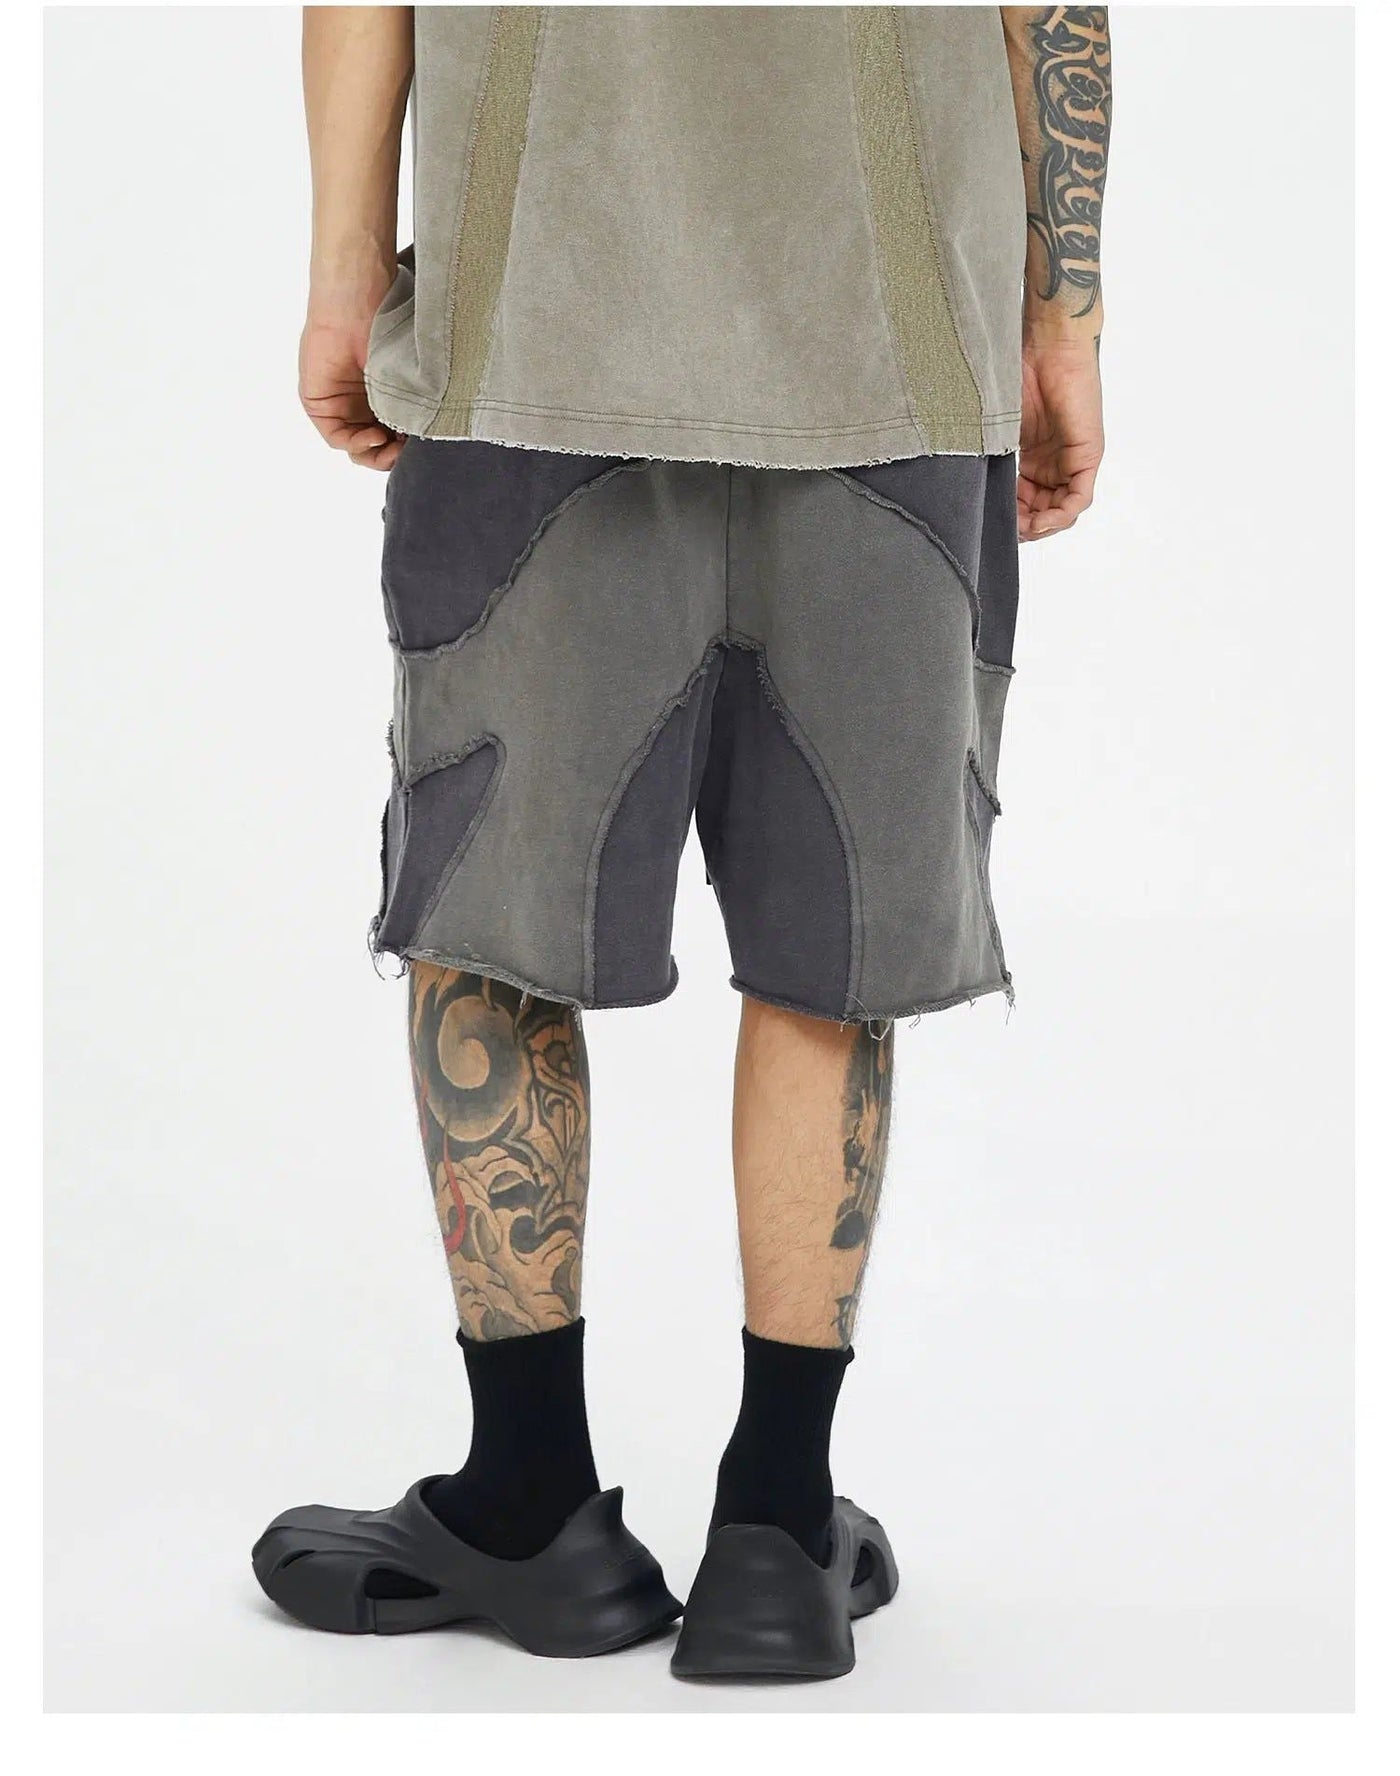 Spliced Curves Raw Shorts Korean Street Fashion Shorts By Face2Face Shop Online at OH Vault